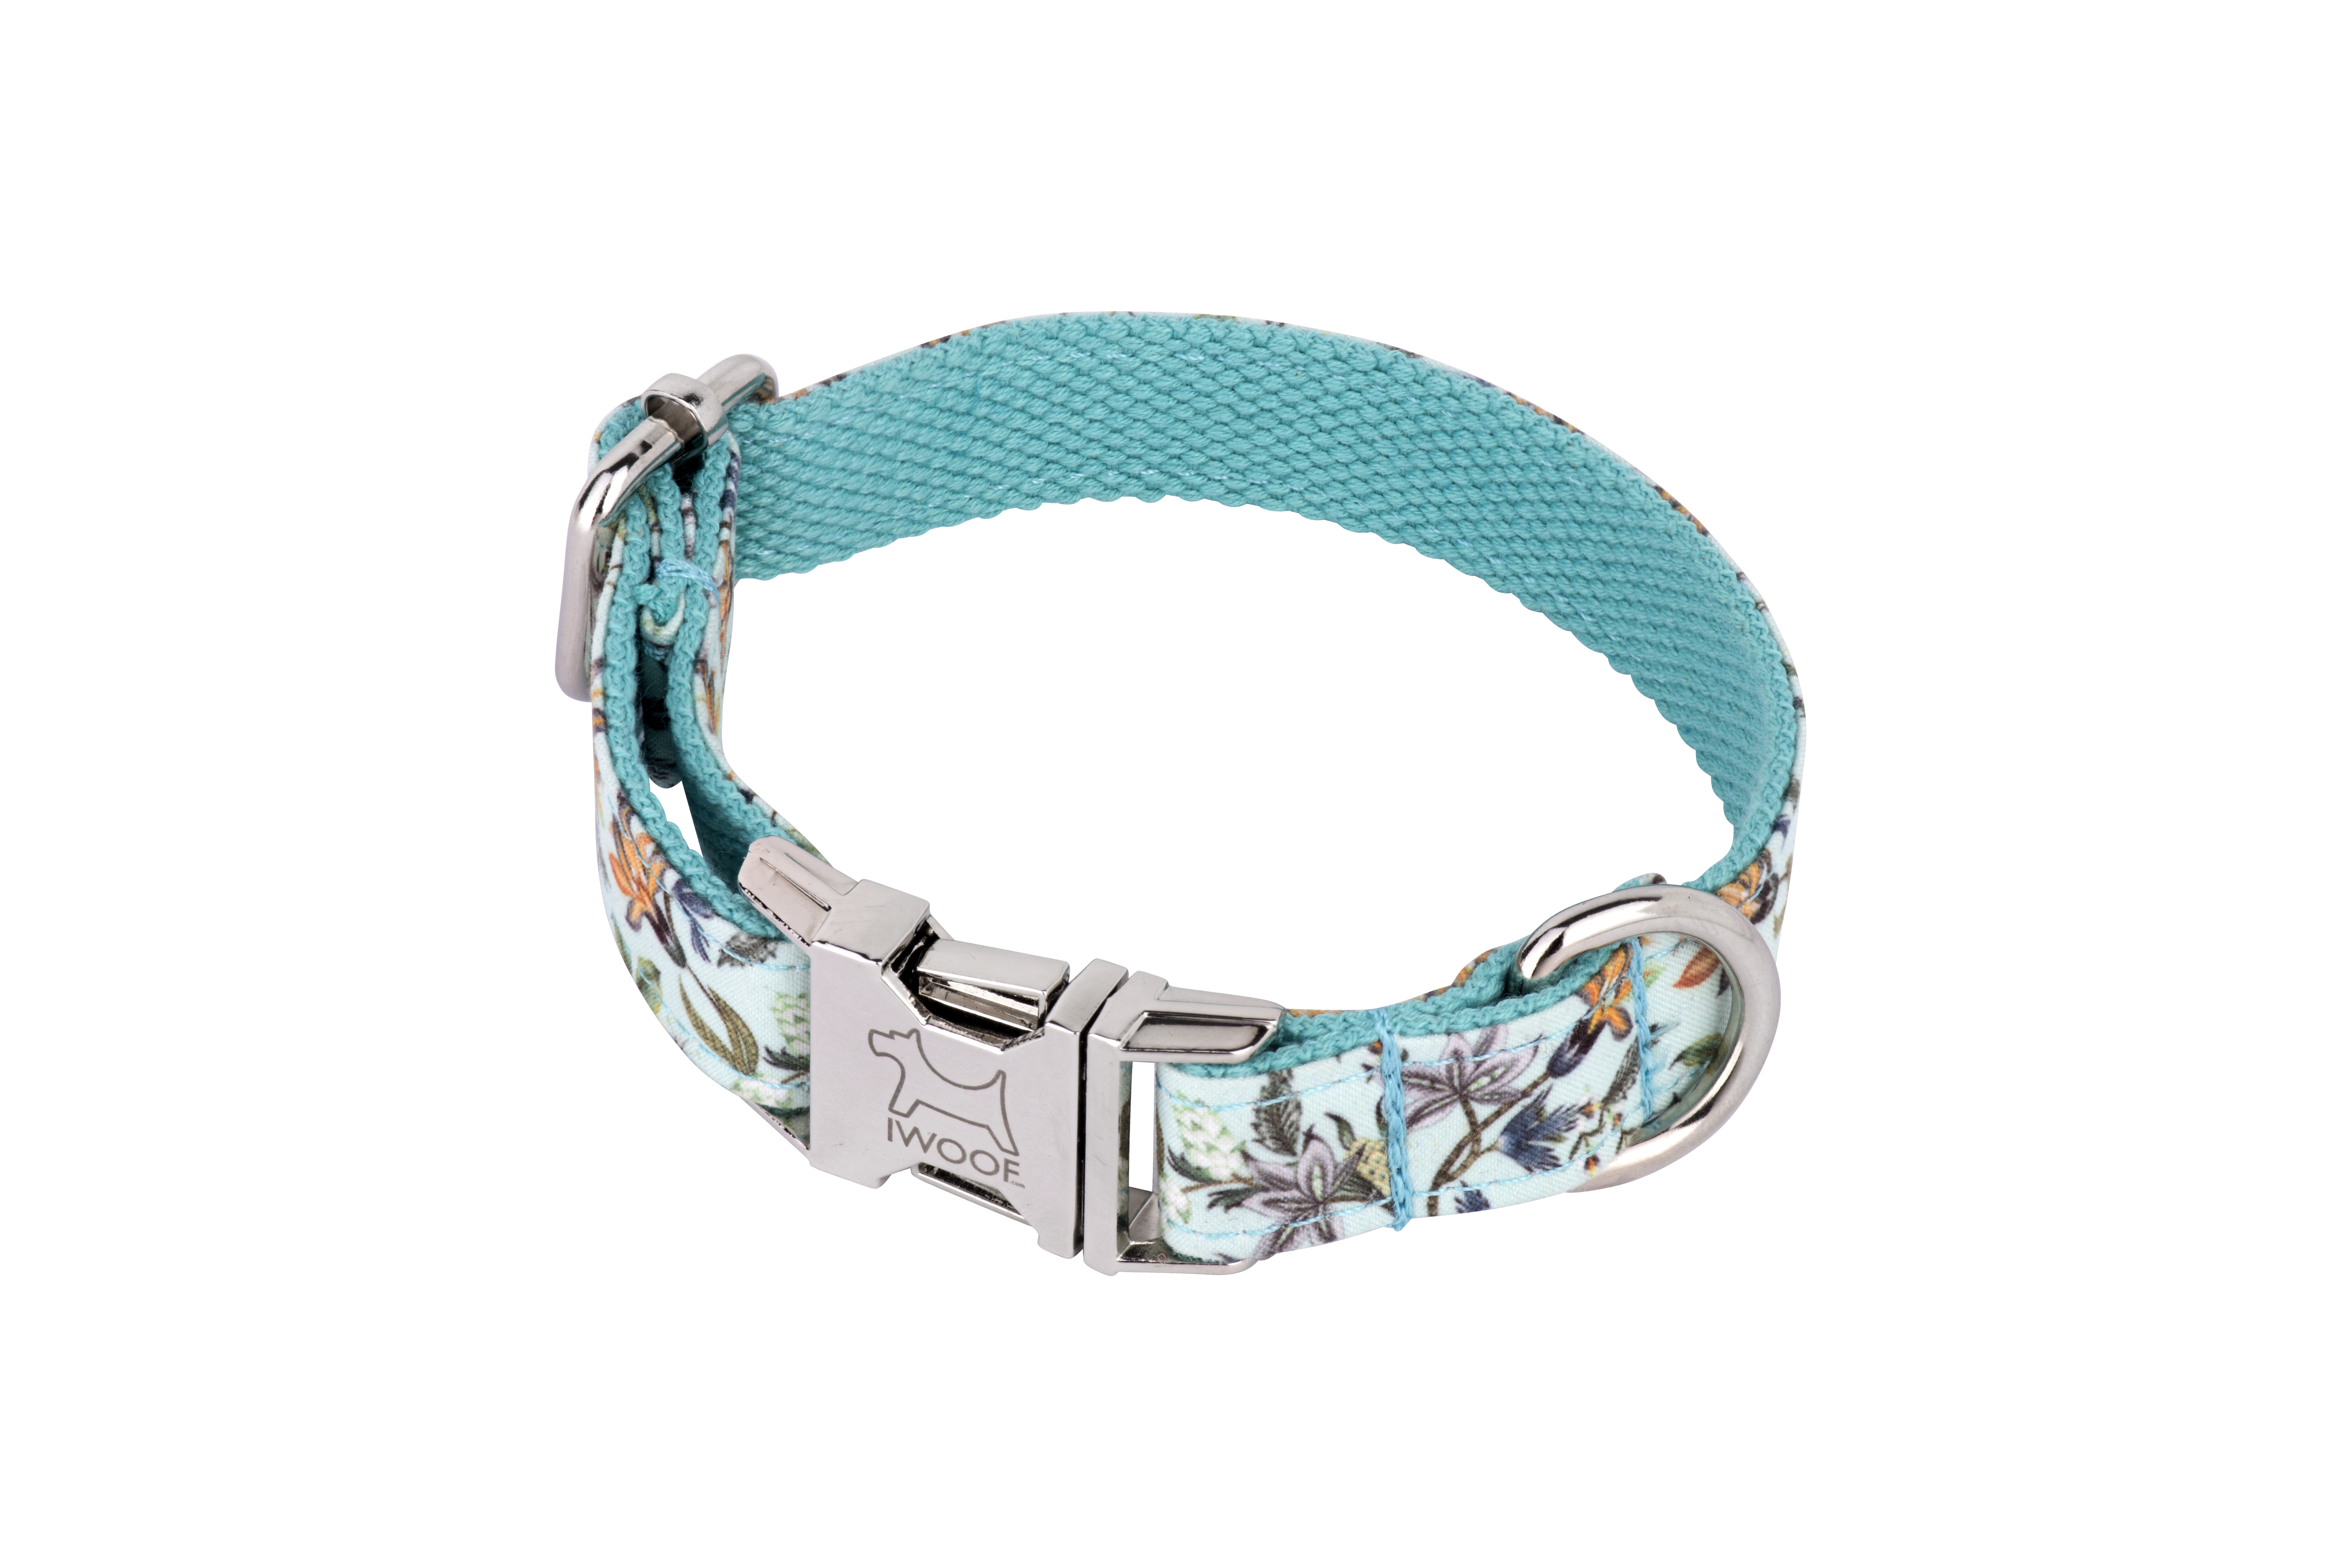 Meadow designer dog collar and dog lead by IWOOF